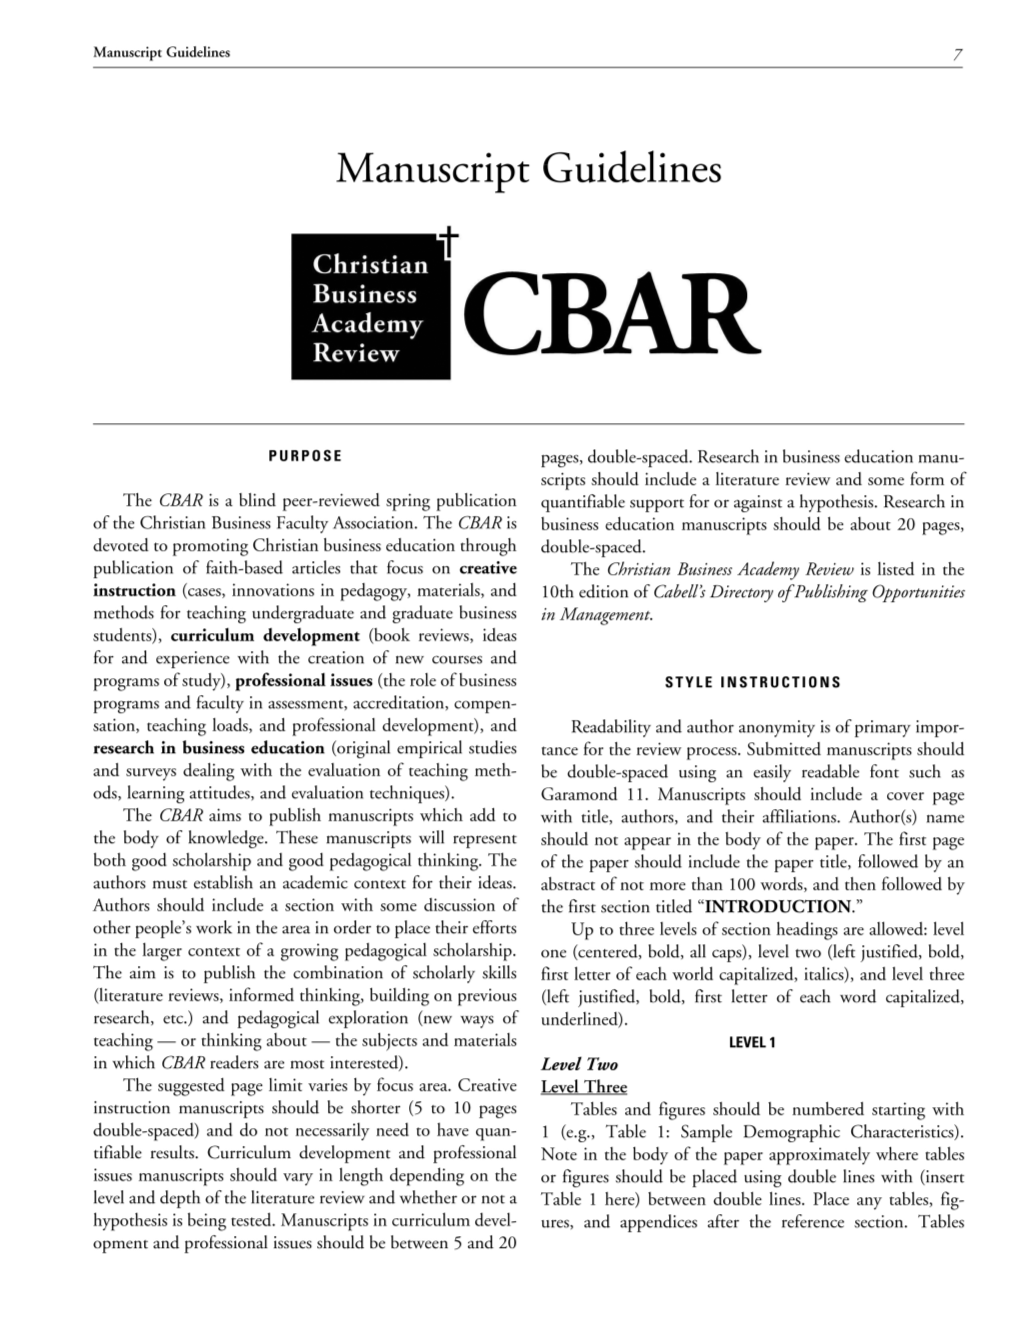 The CBAR Is a Blind Peer-Reviewed Spring Publication of the Christian